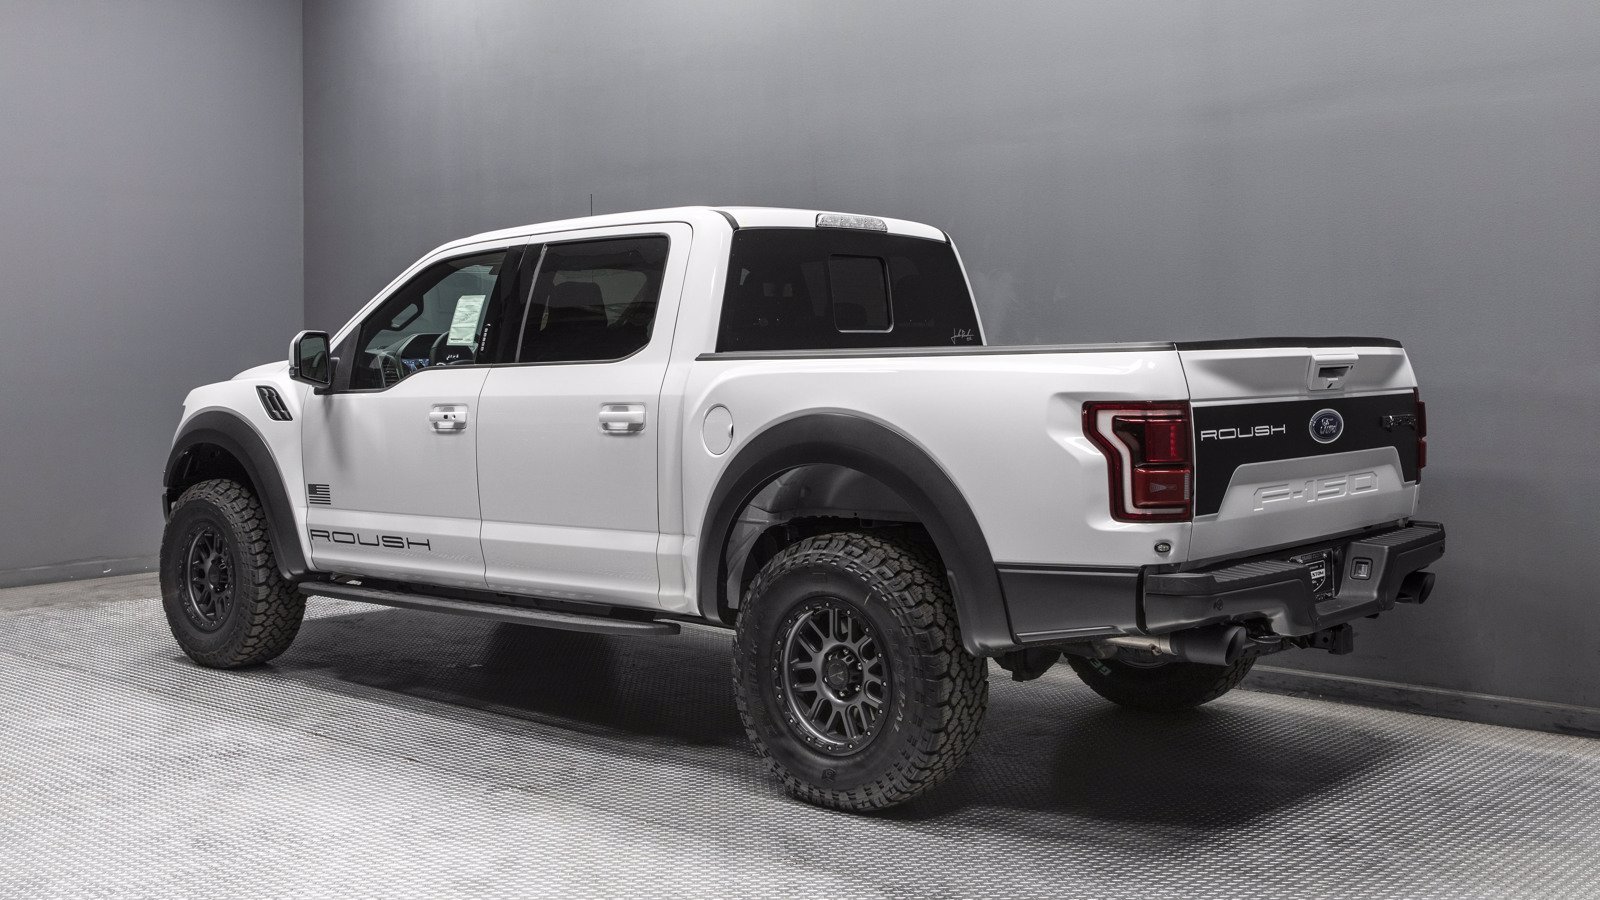 New 2020 Ford F-150 Raptor Roush Crew Cab Pickup in Buena Park #07227 ...